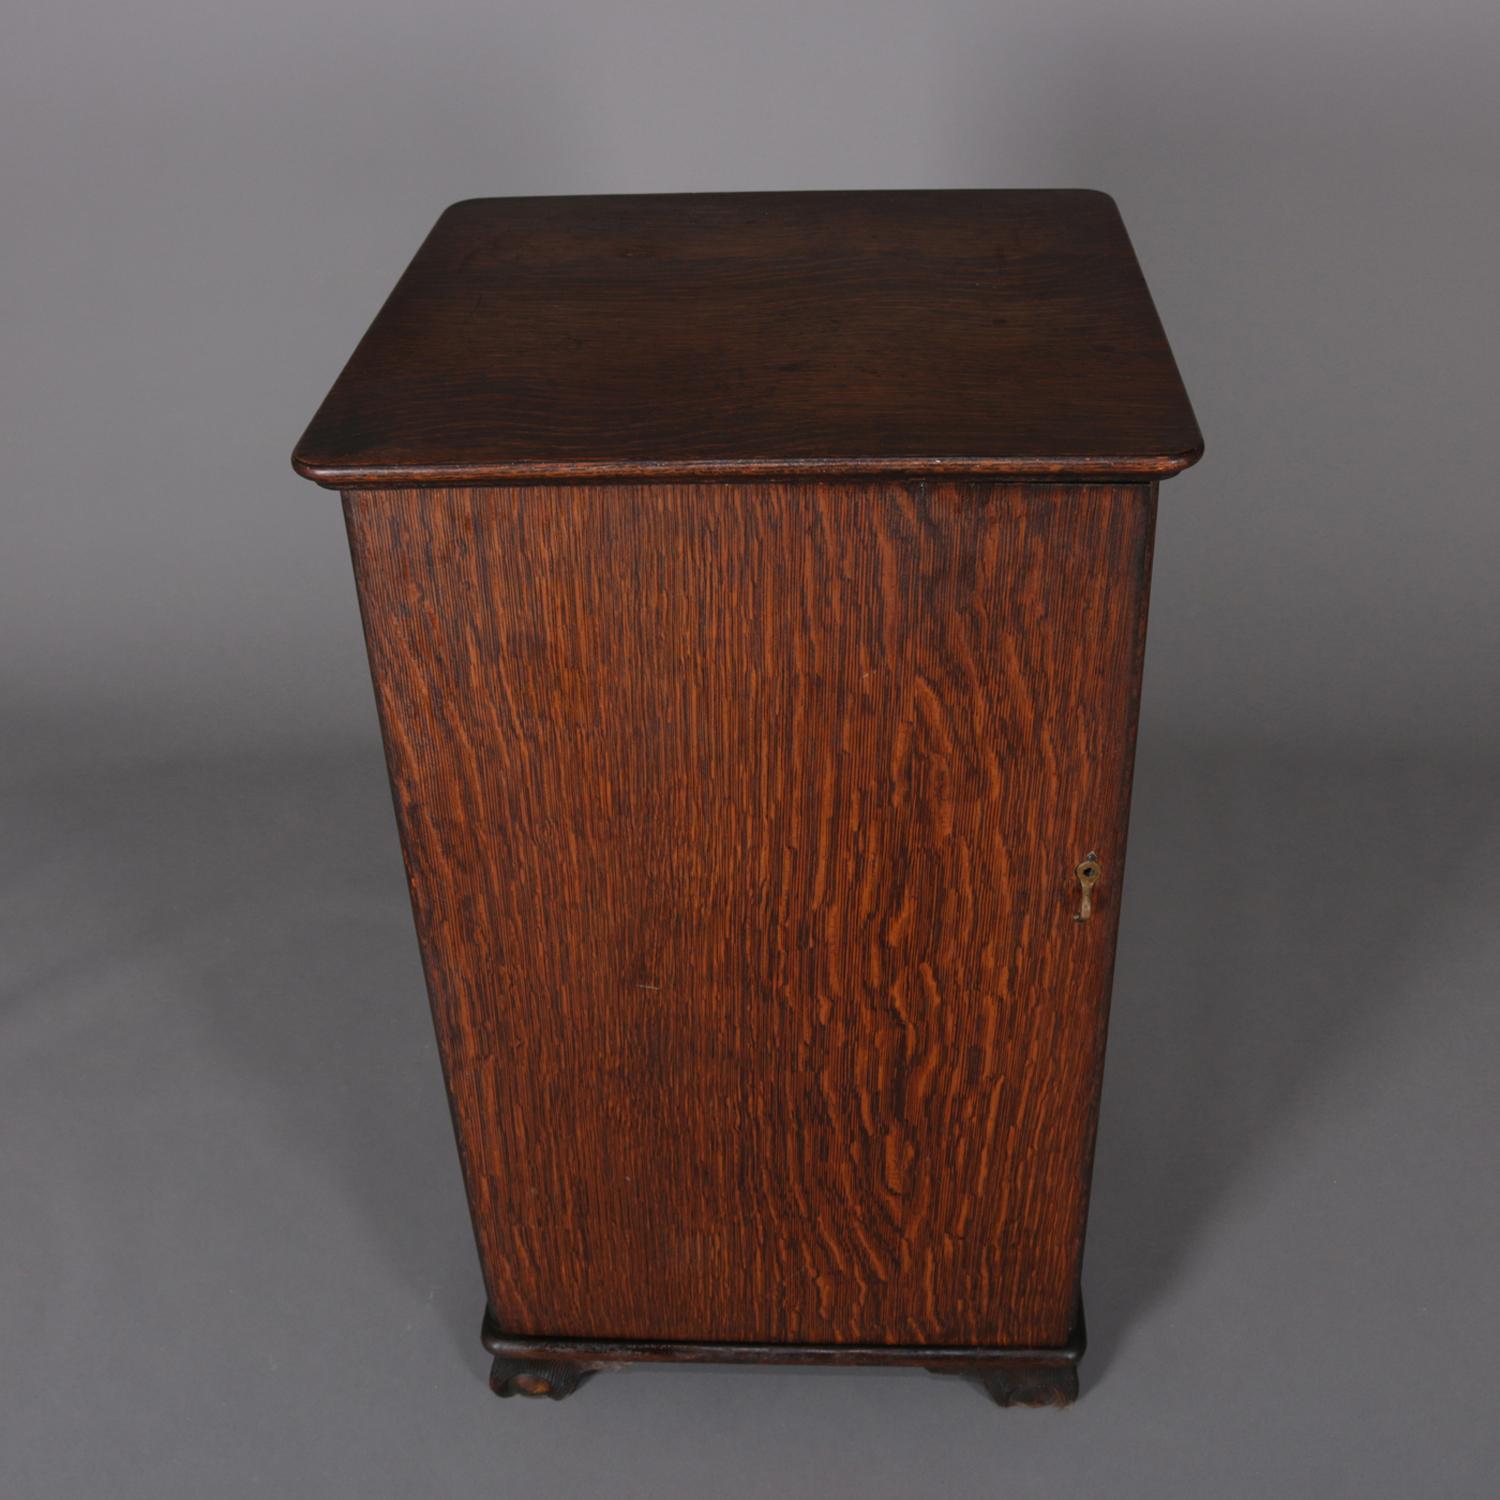 American Antique Arts & Crafts Mission Oak Edison Cylinder and Phonograph Cabinet